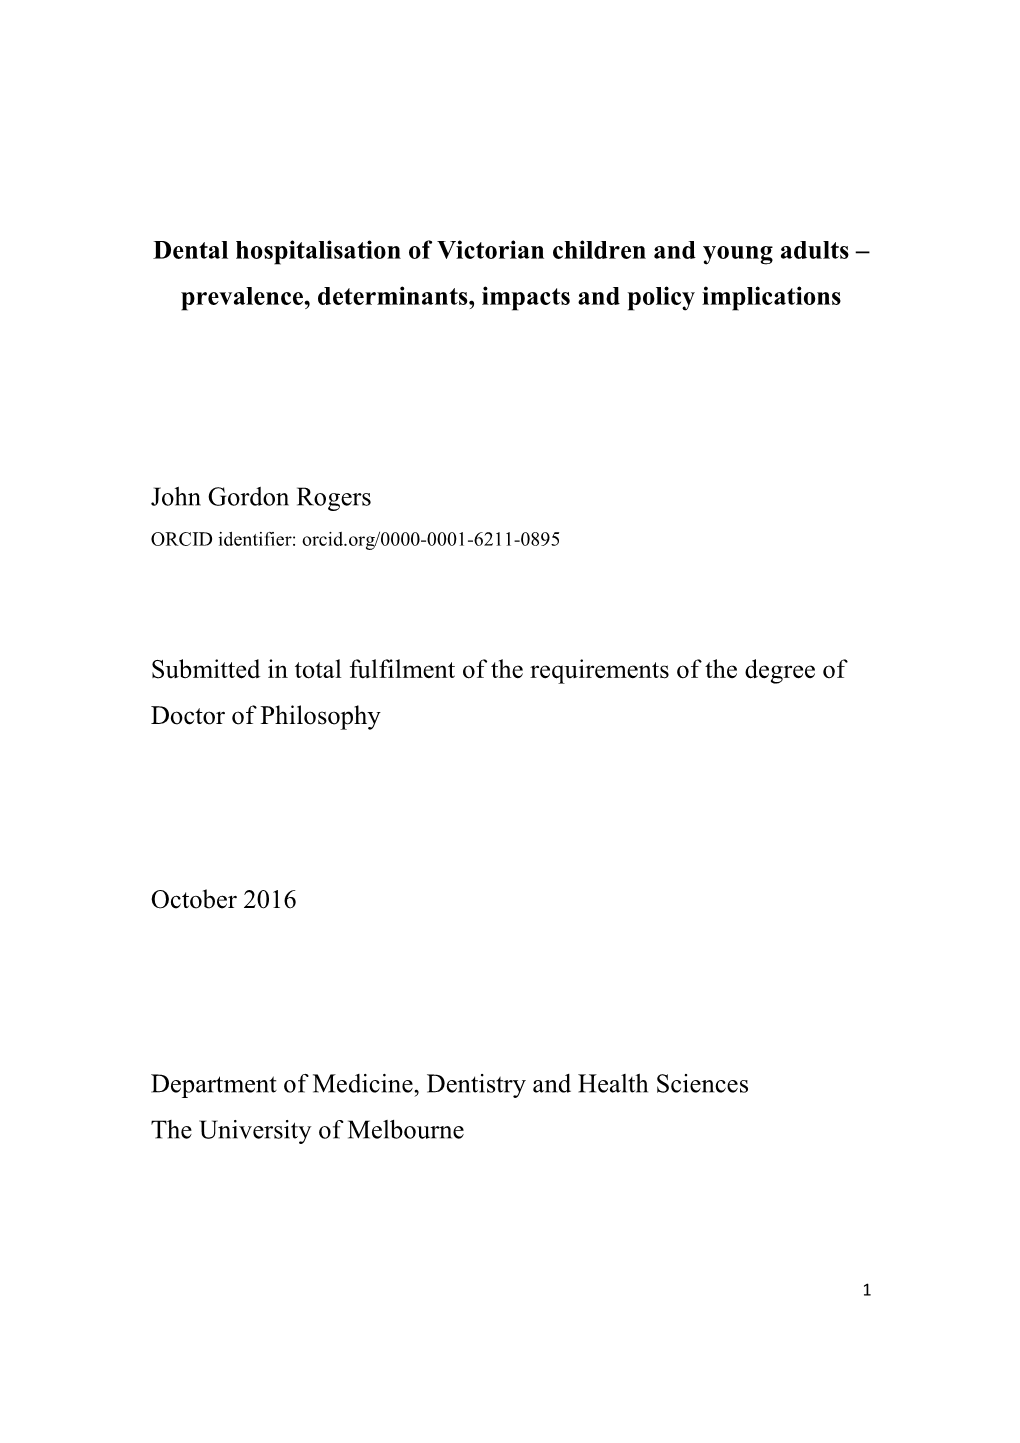 Dental Hospitalisation of Victorian Children and Young Adults – Prevalence, Determinants, Impacts and Policy Implications